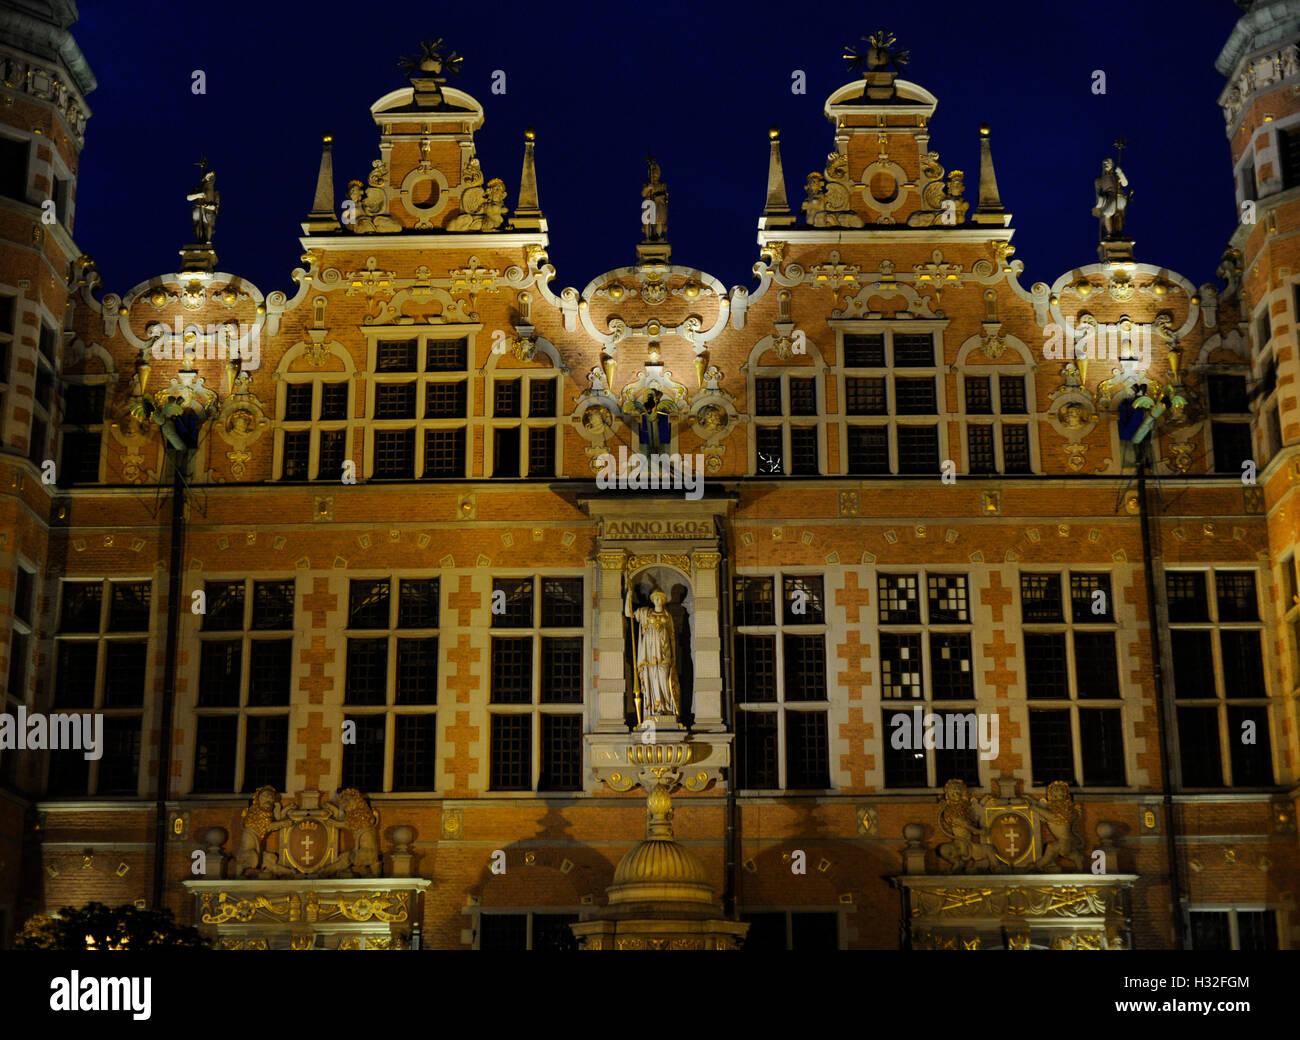 Poland. Gdansk. Great Arsenal. 17th centry. Mannerist. Architect Anthony van Obbergen (1543-1611). Night view. Stock Photo